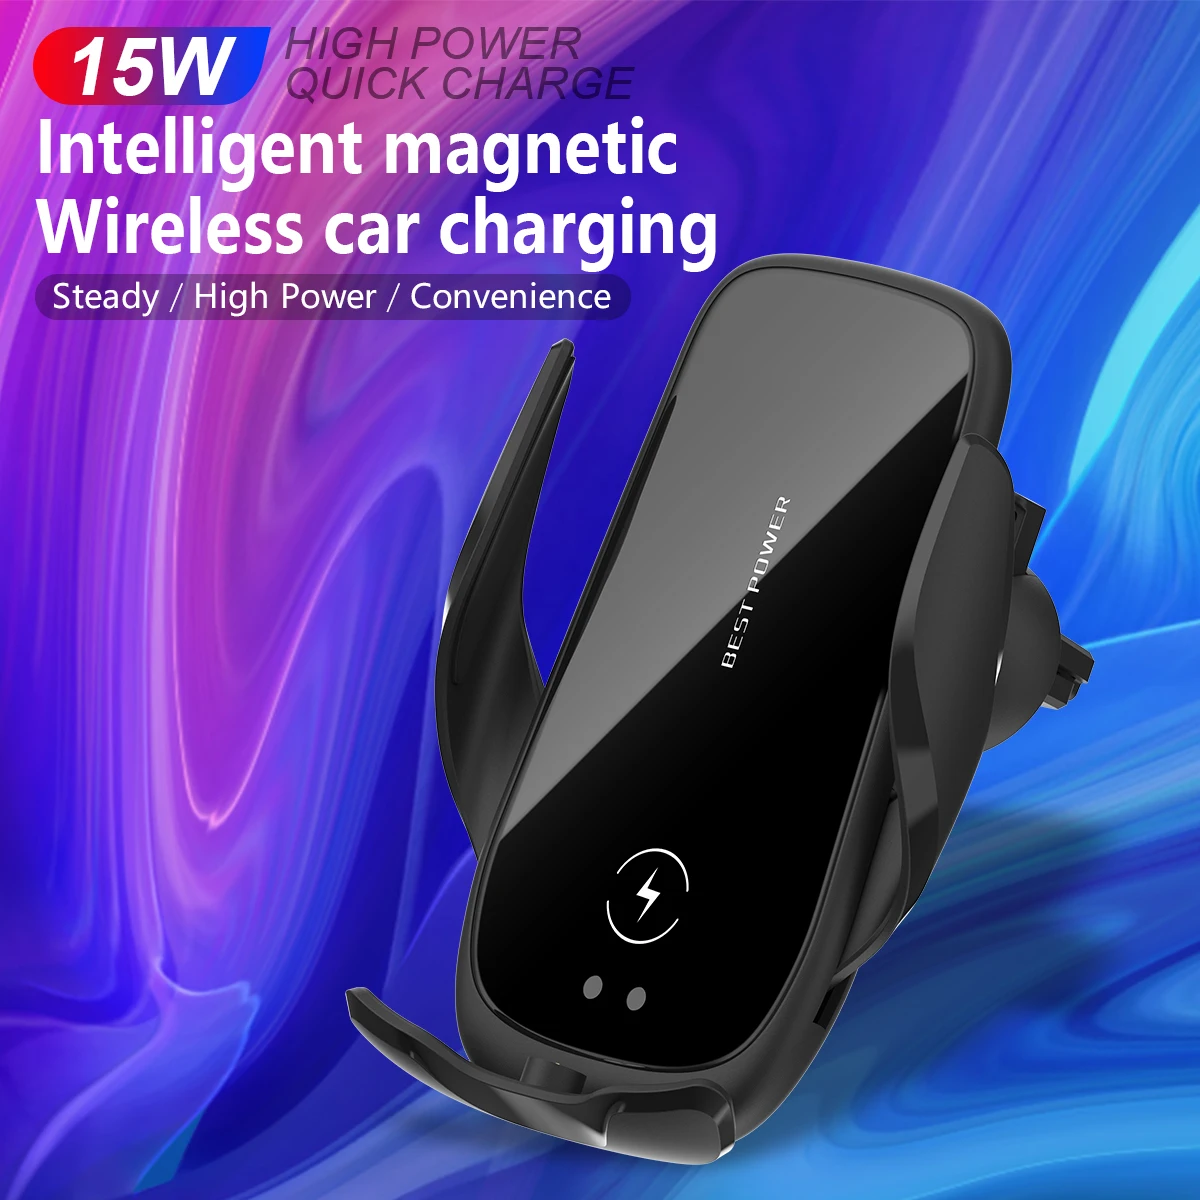 floveme 15w wireless charger car phone holder for your mobile phone anti scratch glass mirror no magnetic gps mount phone stand free global shipping